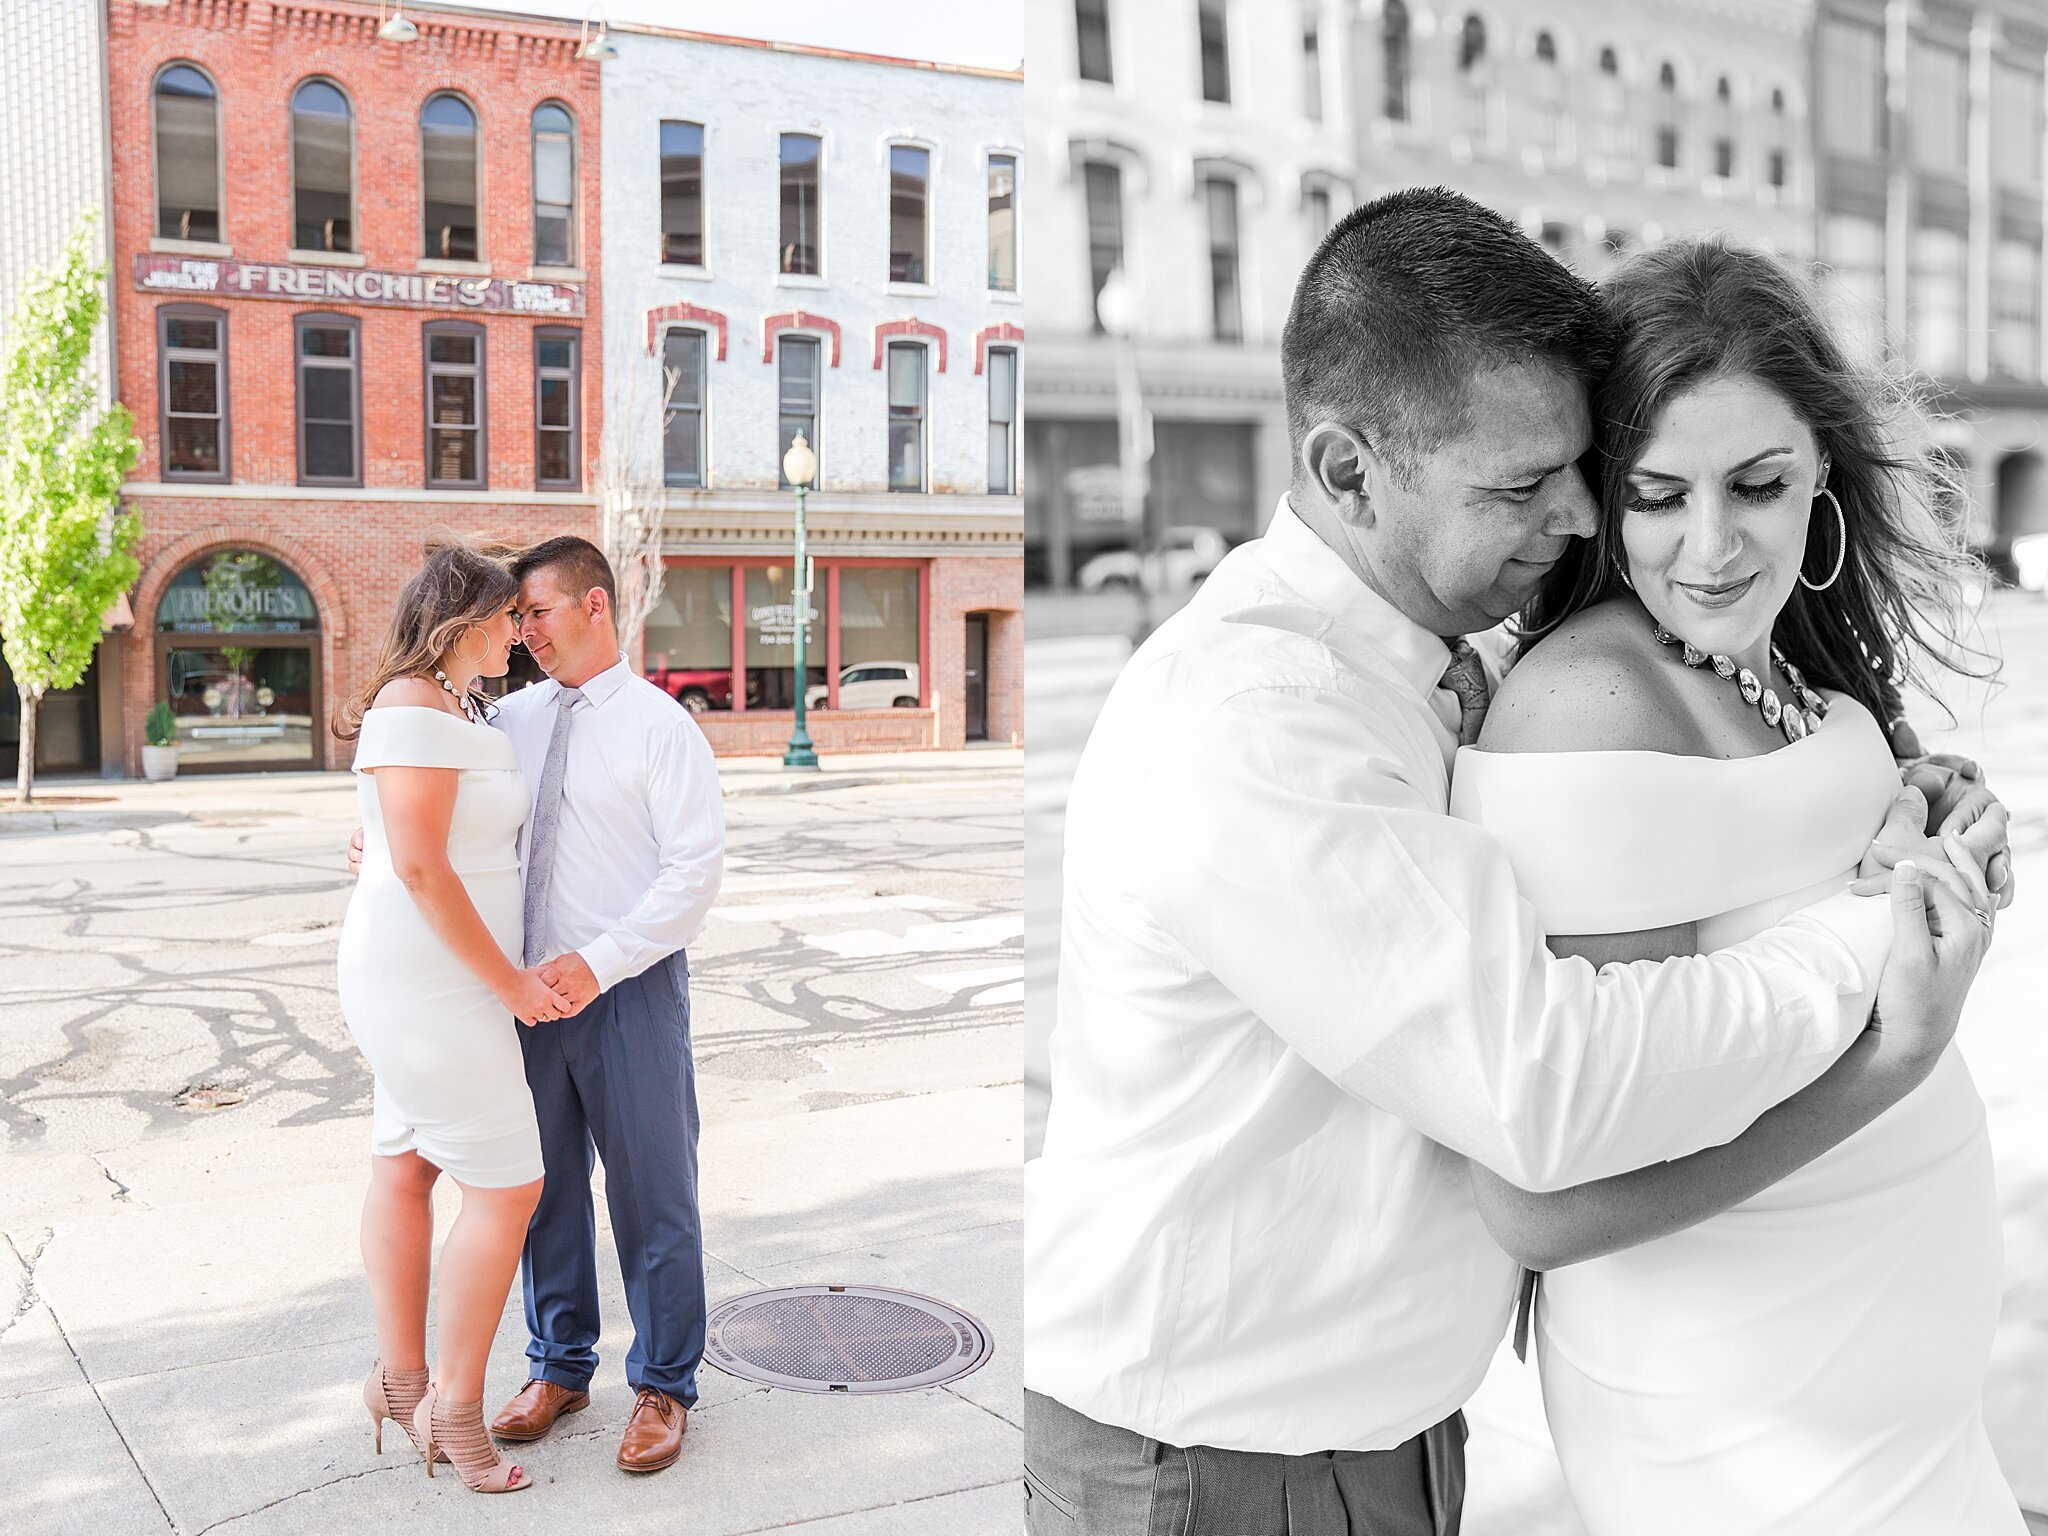 detroit-wedding-photographer-classic-engagement-photos-in-historic-downtown-monroe-mi-by-courtney-carolyn-photography_0017.jpg